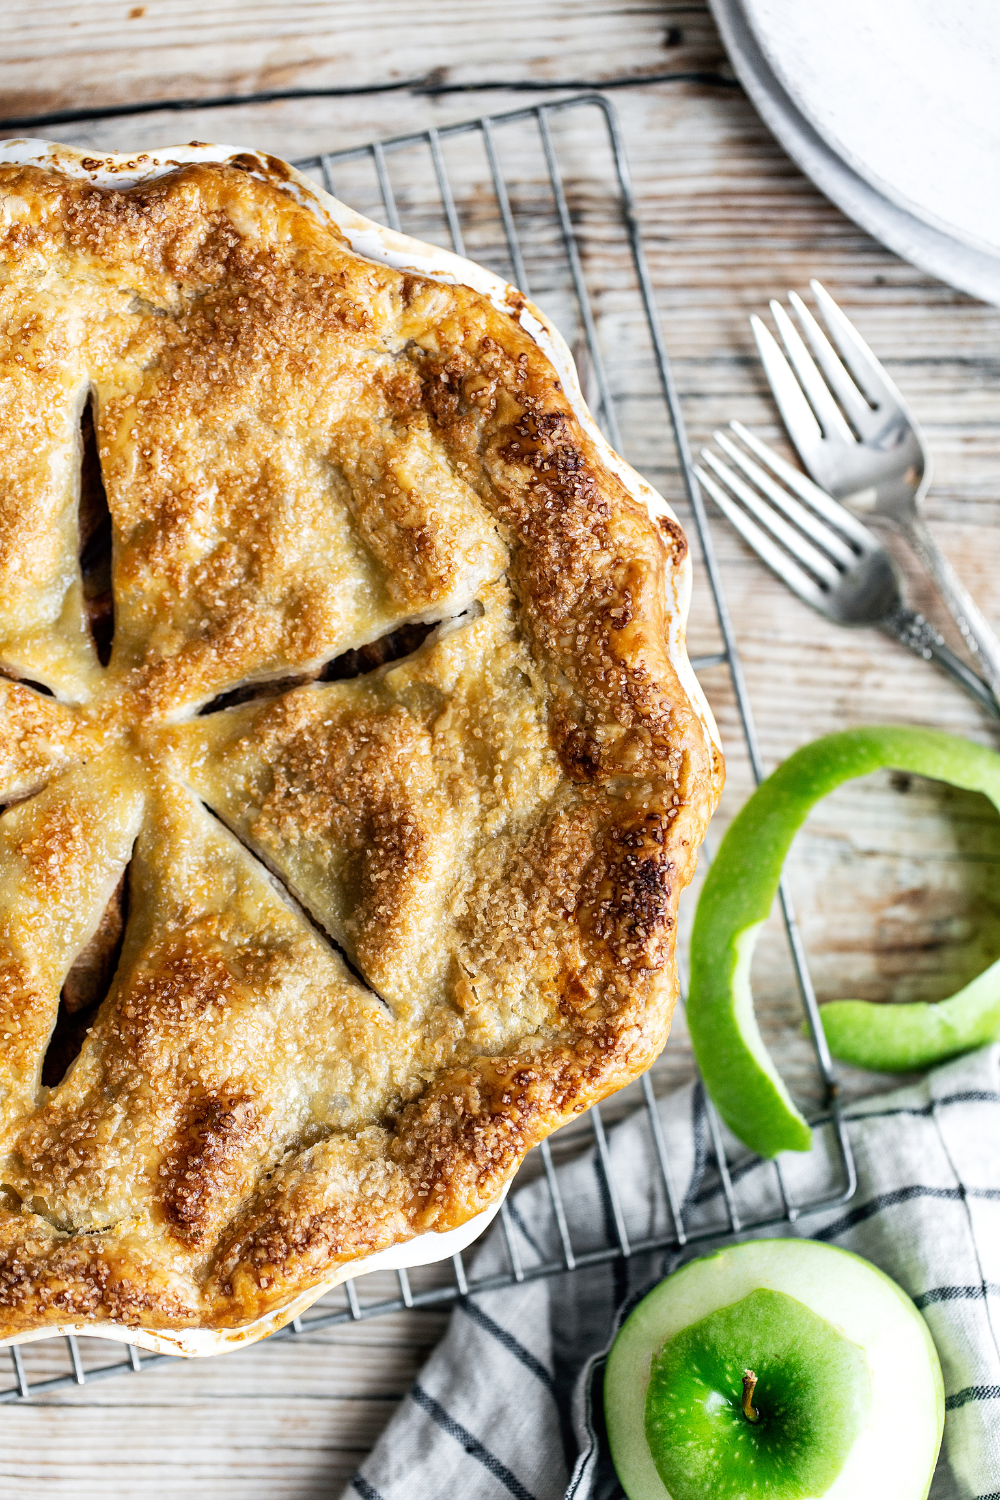 the baked apple pie with some granny smith apples and forks next to it.